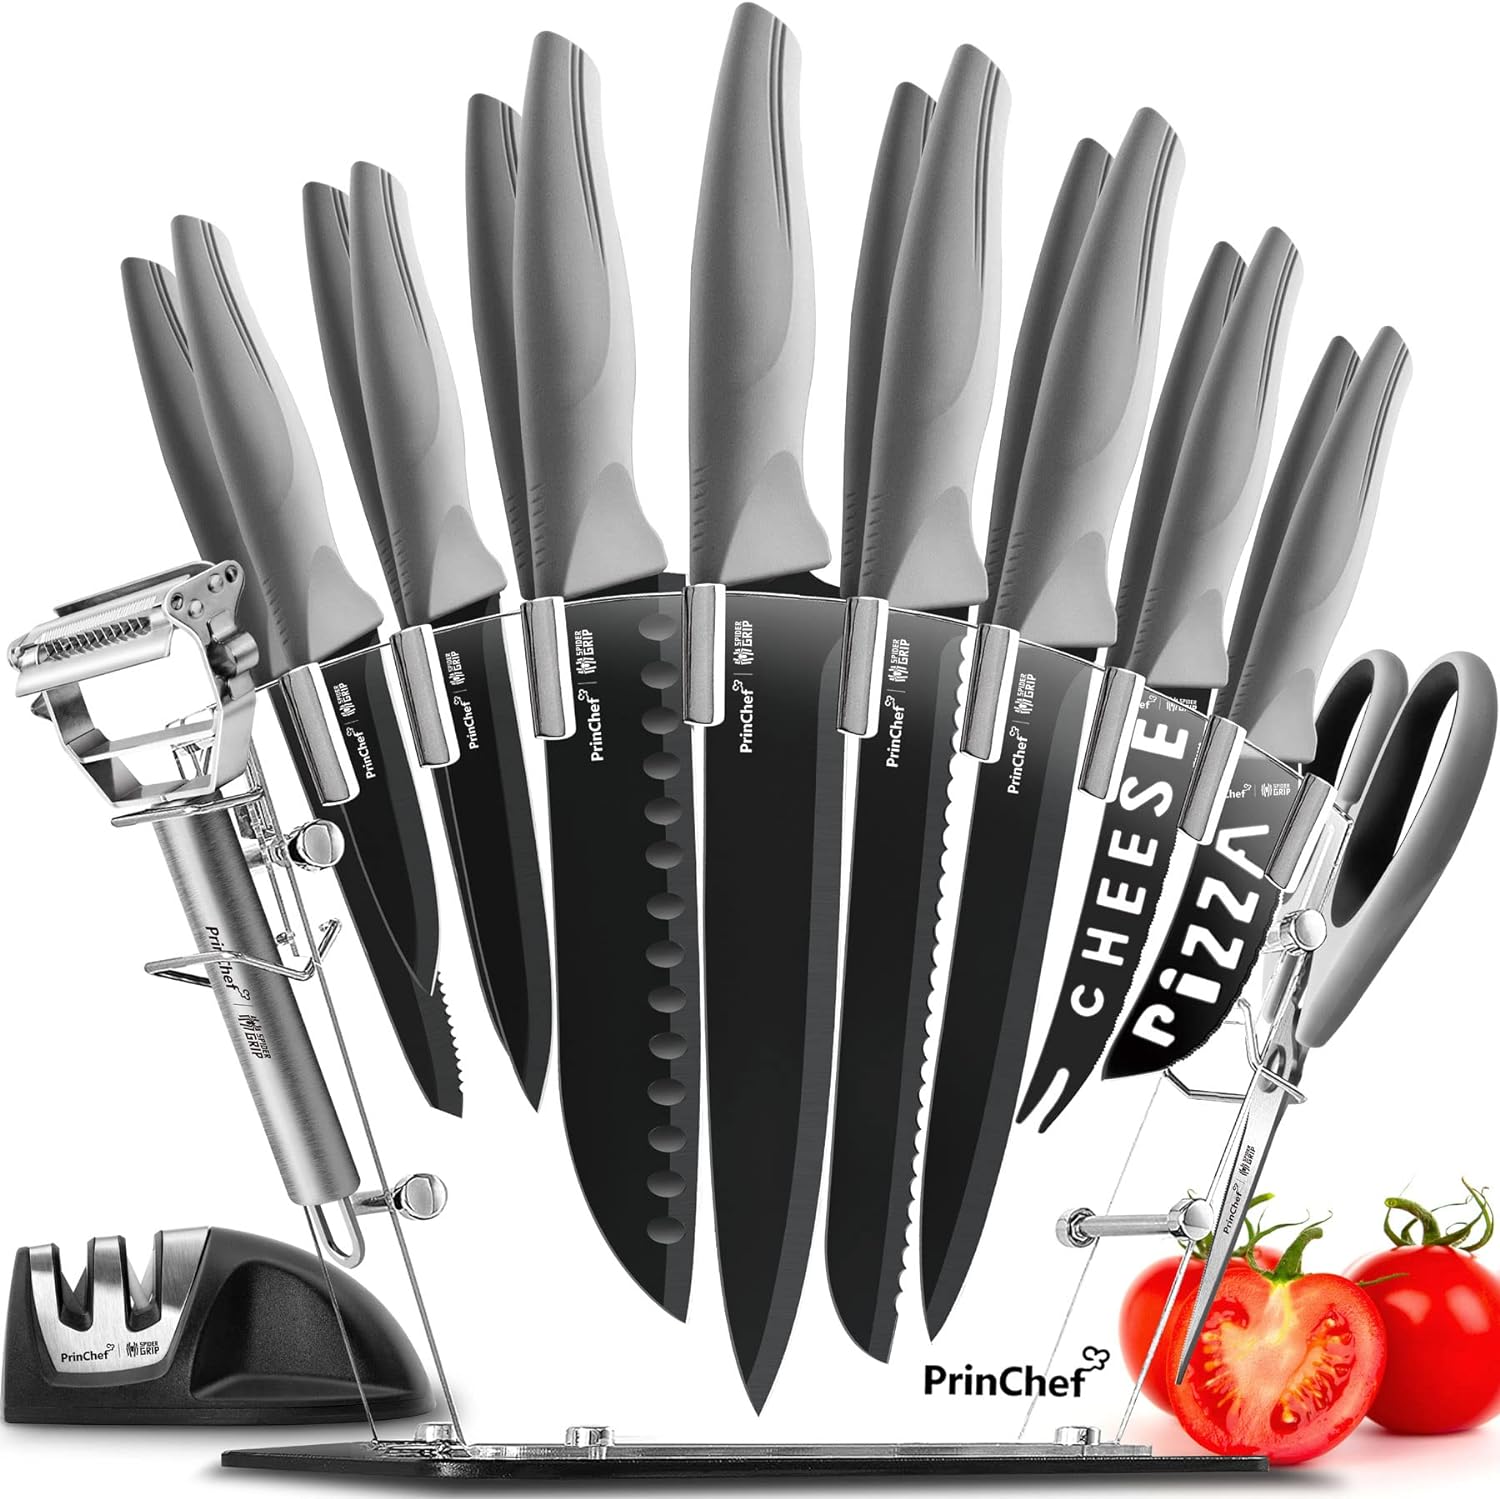 PrinChef Knife Set, 19 Pcs Rust Proof Knives Set for Kitchen, with Acrylic Stand, Sharpener, Scissors and Peeler, Stainless Steel kitchen knife set Nonstick and No Scratch